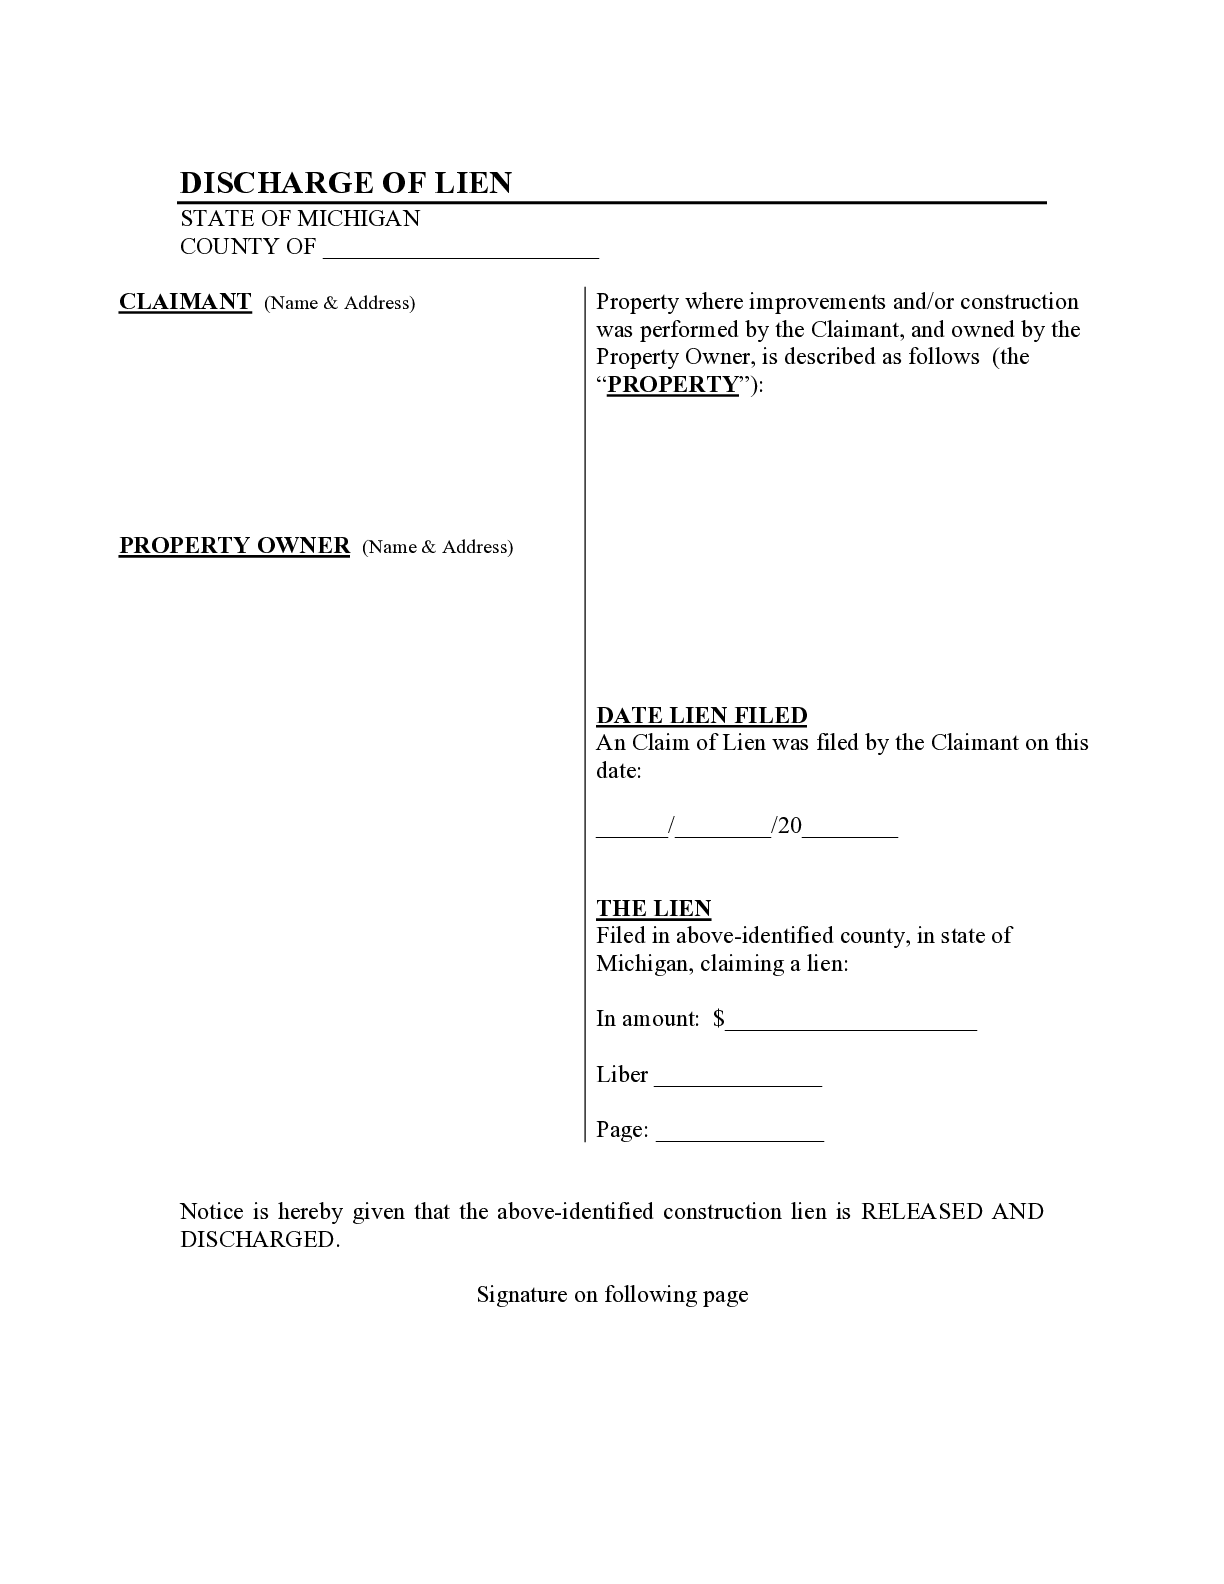 Michigan Discharge of Lien Form - free from